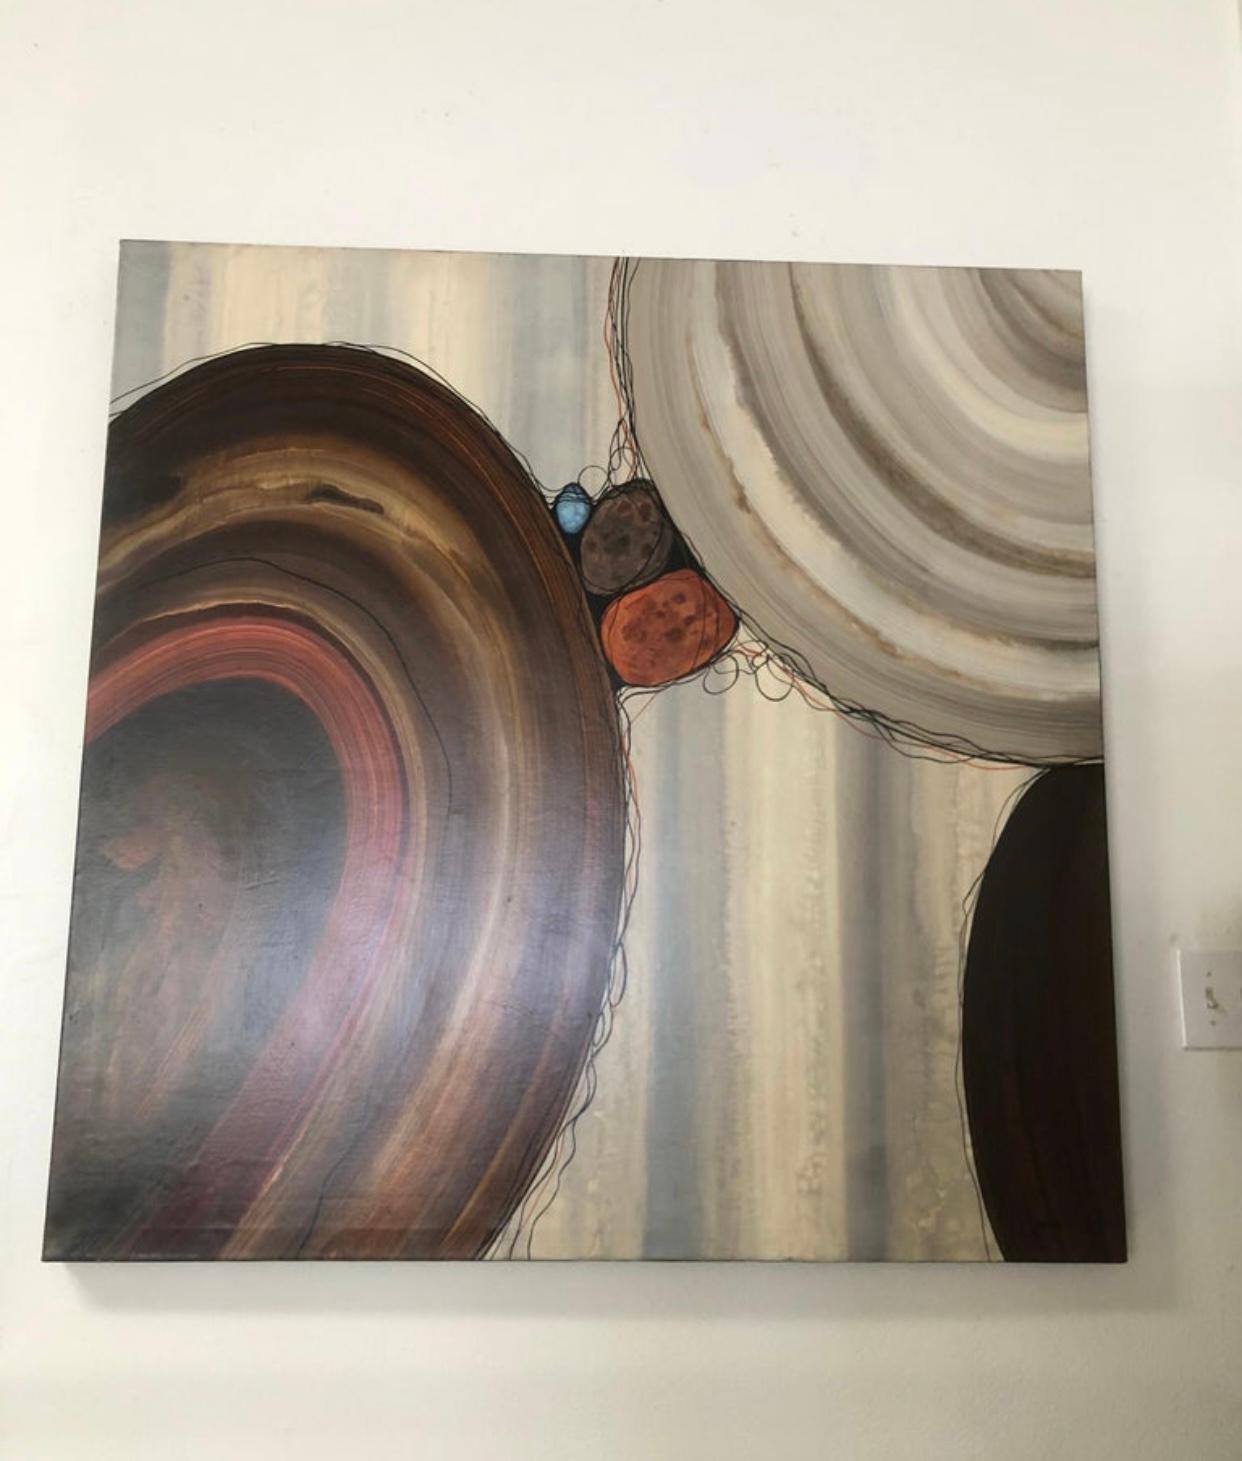 Robert Charon is a listed artist known for his modern abstracts. His series “Orbs” was extremely popular and a few images were produced in prints sold worldwide. This large 49 x 49 painting is original on canvas. Beautiful modern browns with a